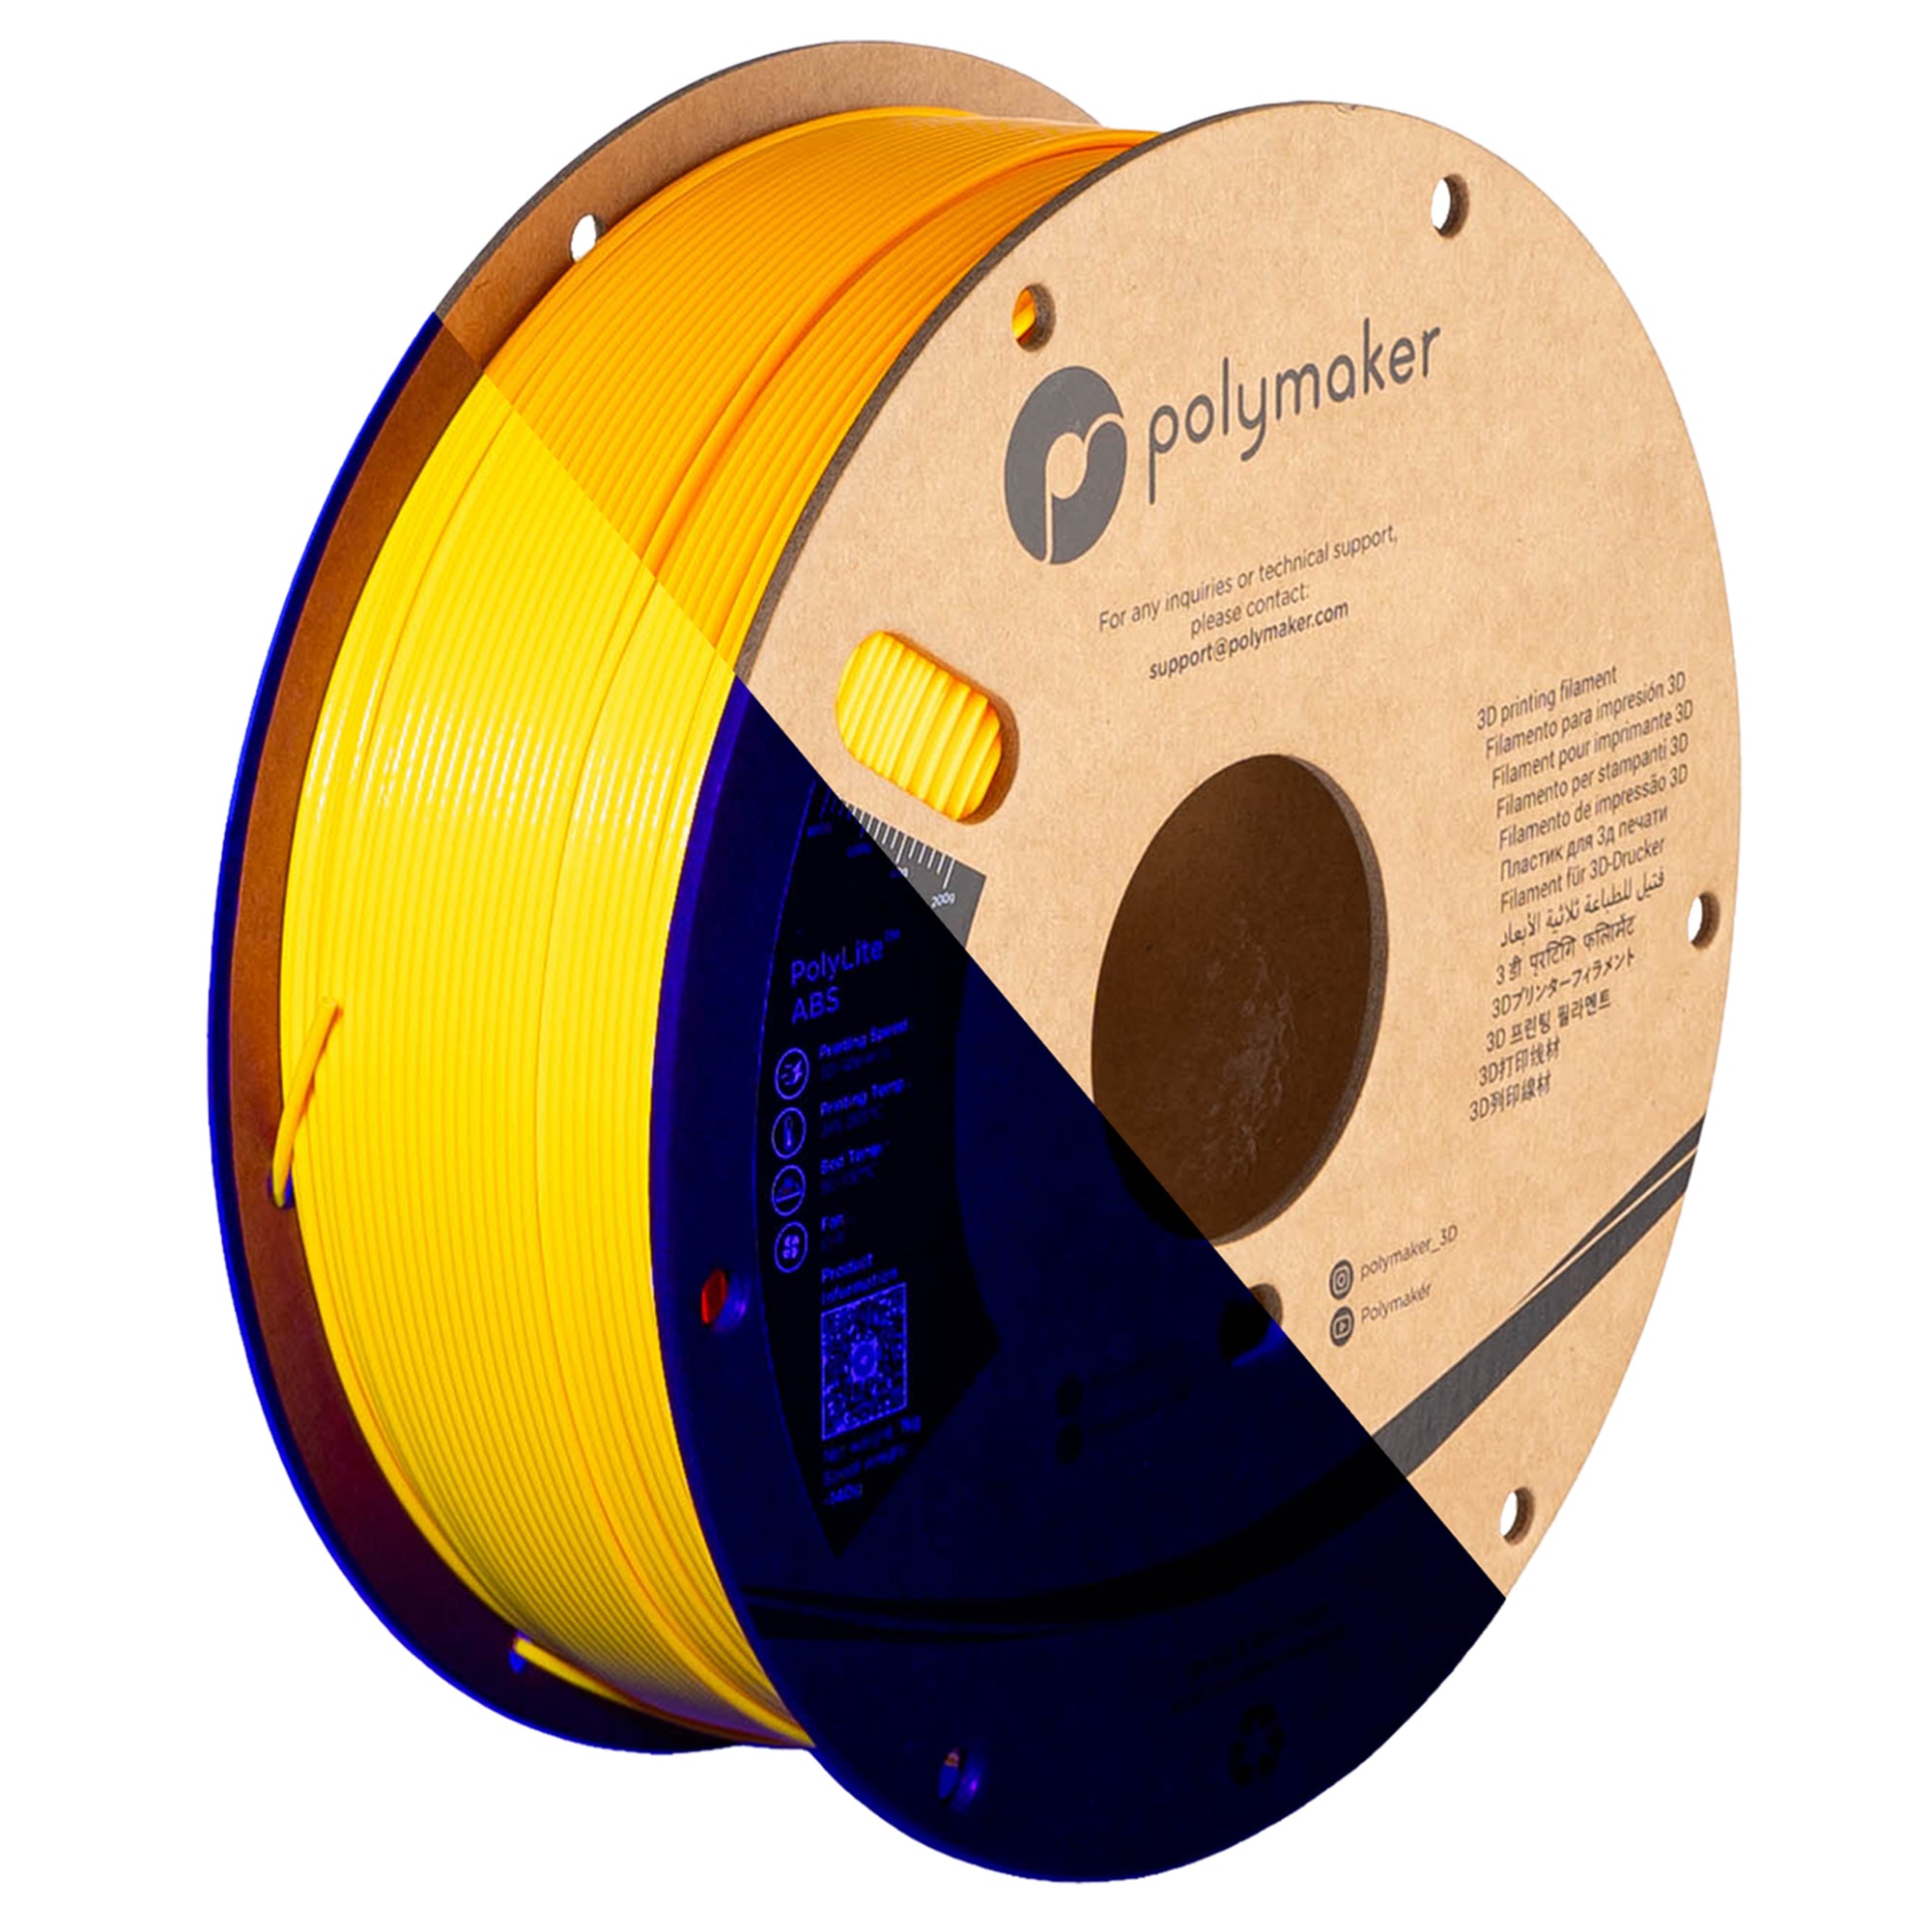 Polymaker PolyLite Neon ABS 1.75mm Filament 1kg